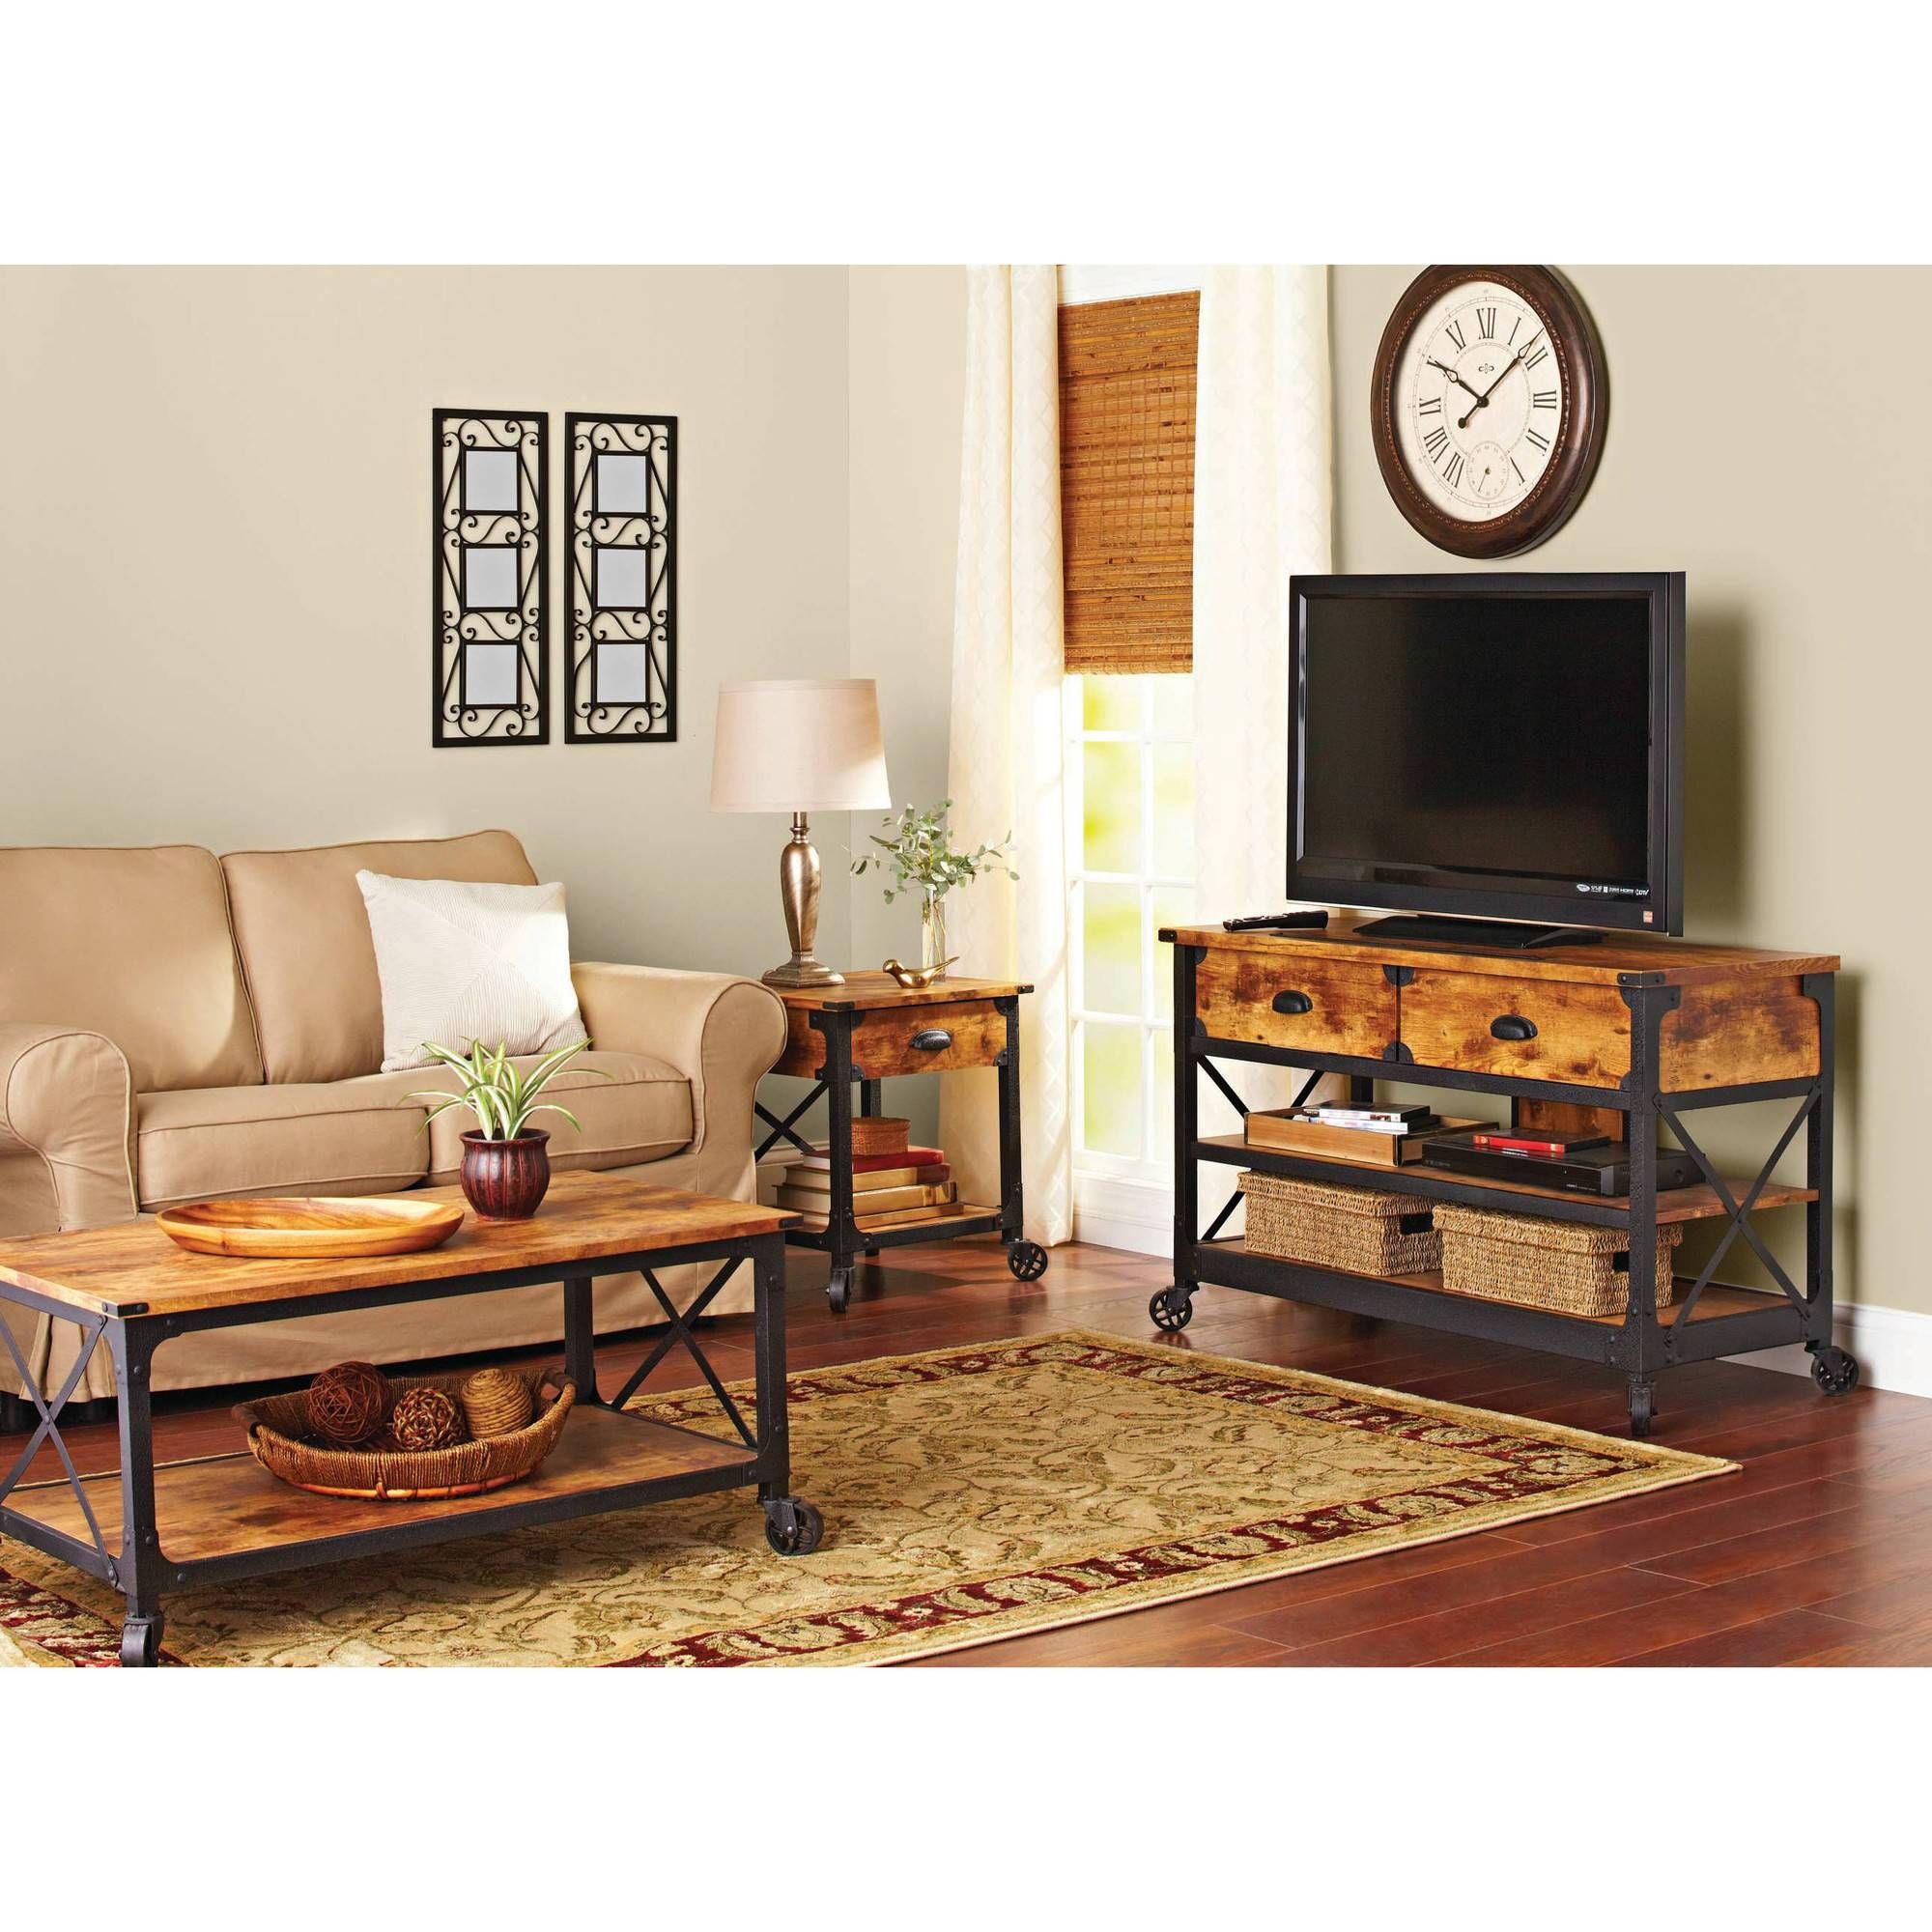 Matching Wooden Coffee Table And Tv Stand | Coffee Tables Decoration Throughout Rustic Coffee Tables And Tv Stands (Photo 2 of 30)